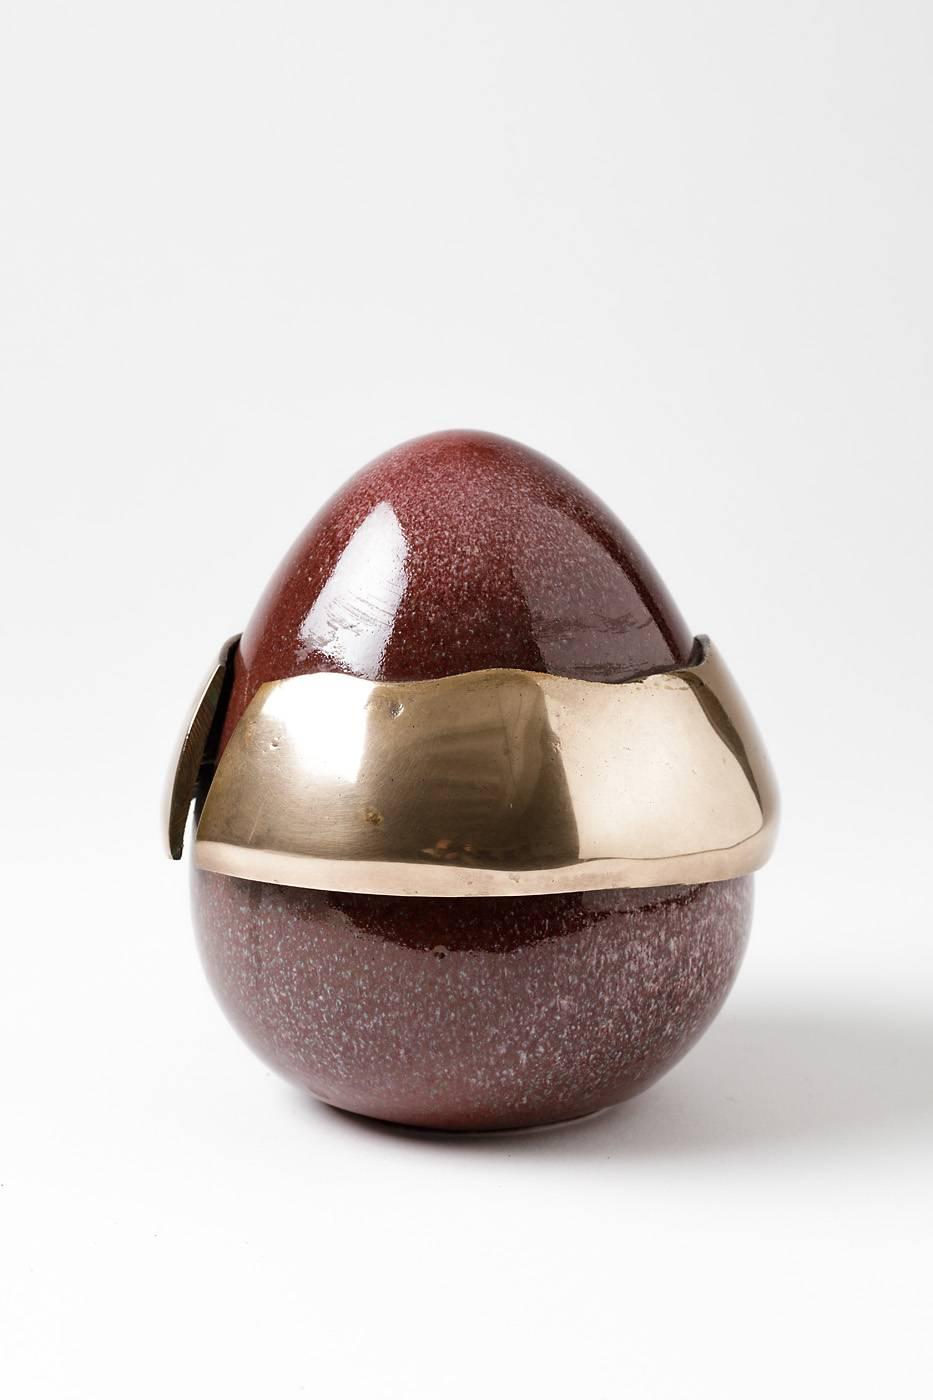 Elegant egg forme by the artist Tim Orr.

Porcelain with red ceramic glaze and piece of bronze.

Perfect conditions and signed under the base.

circa 1970.